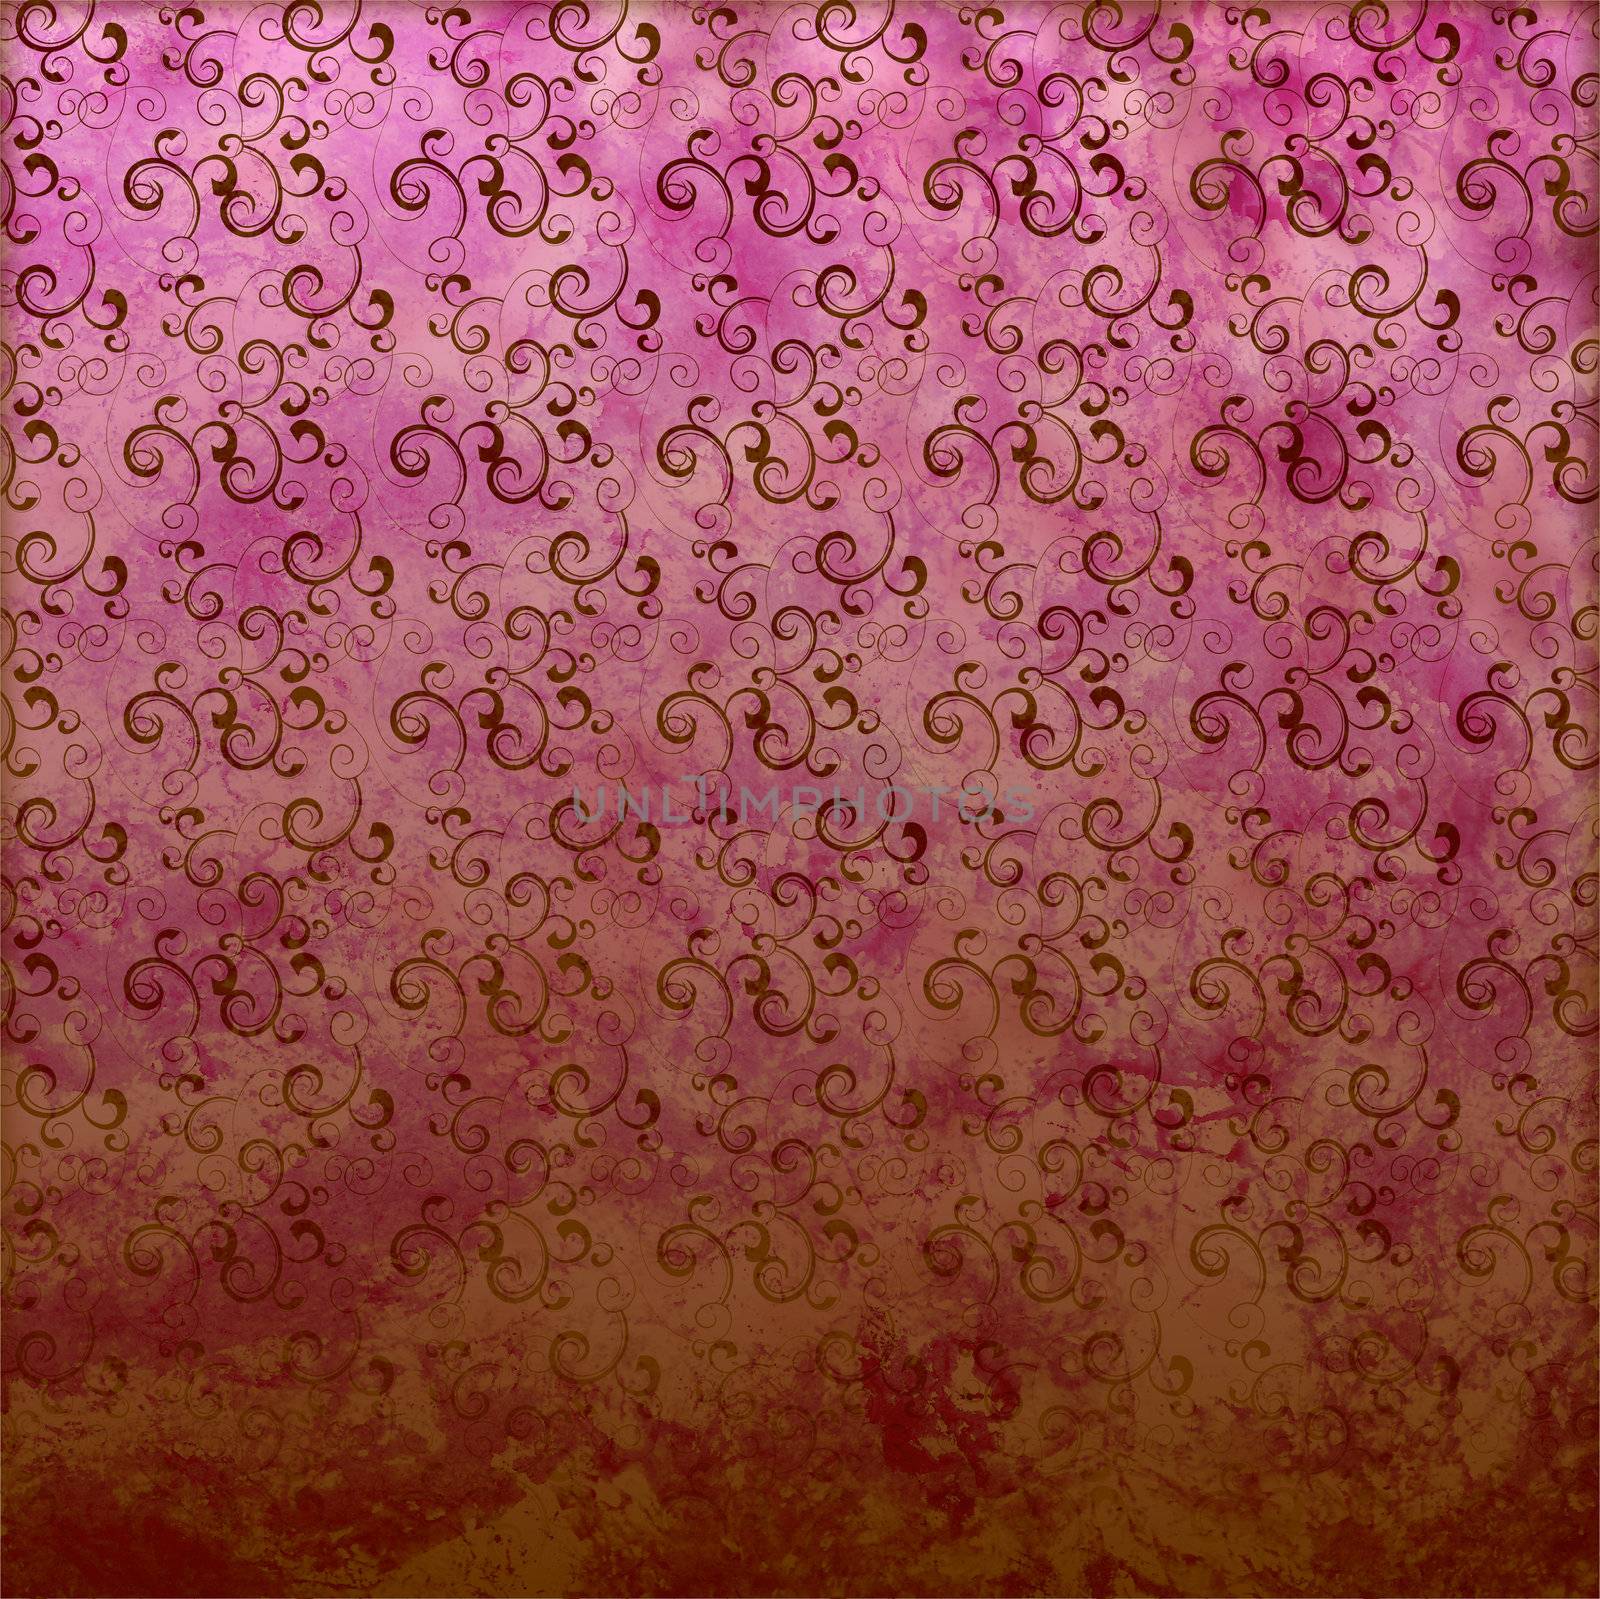 magenta grunge paper background with floral pattern